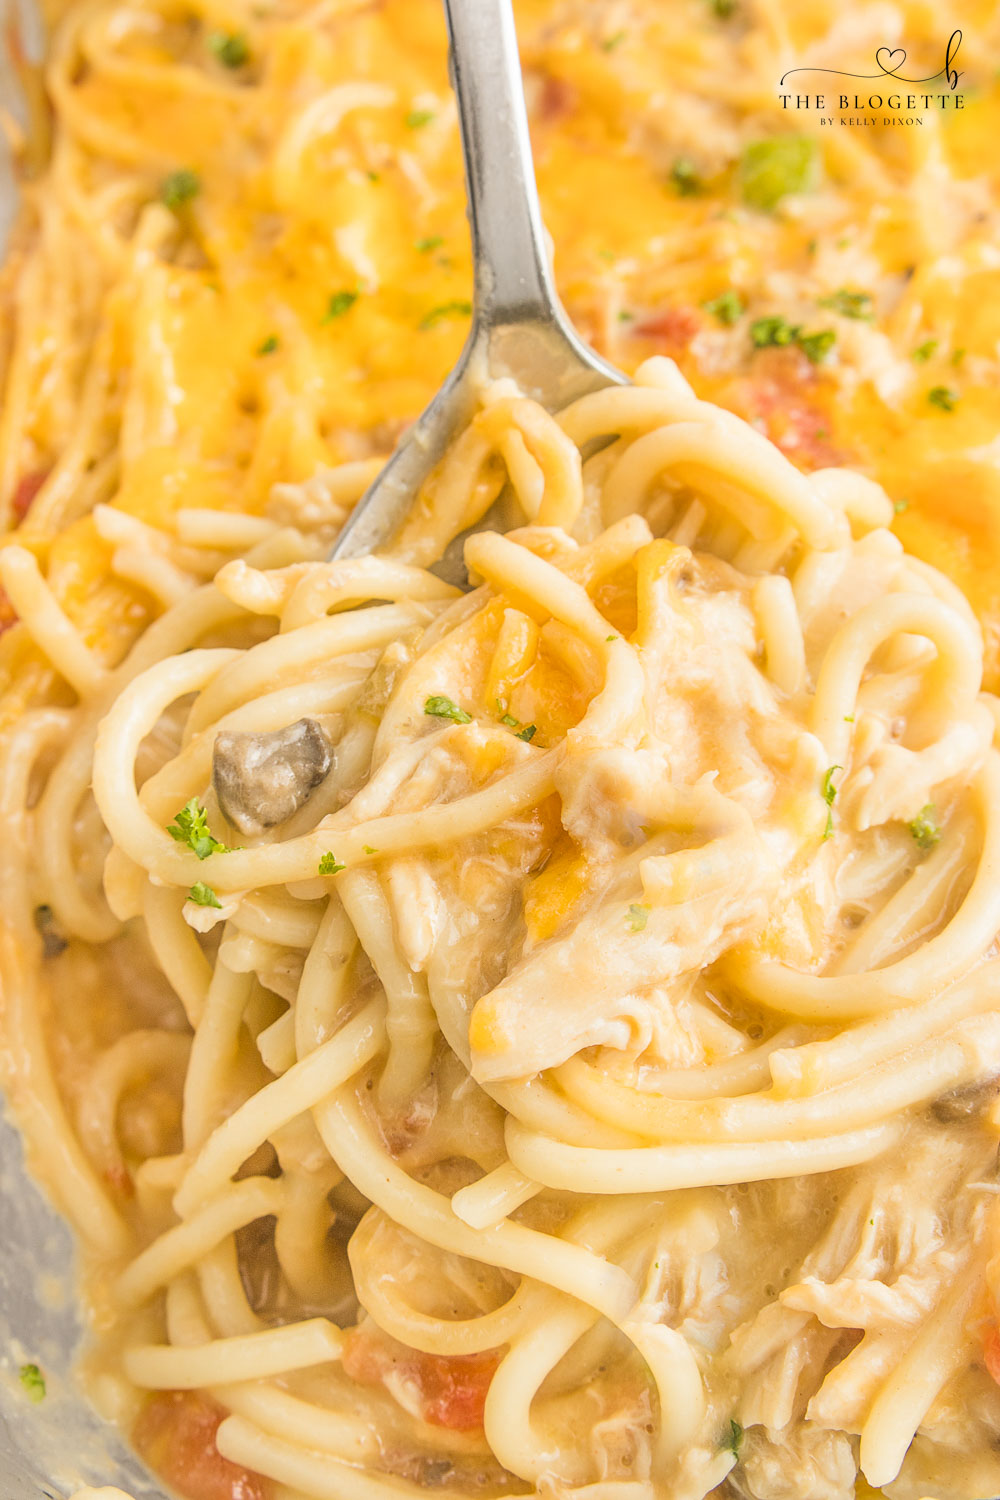 Chicken Spaghetti Casserole is a creamy and comforting dinner with spaghetti, shredded chicken, and a decadent, flavorful, rich sauce.